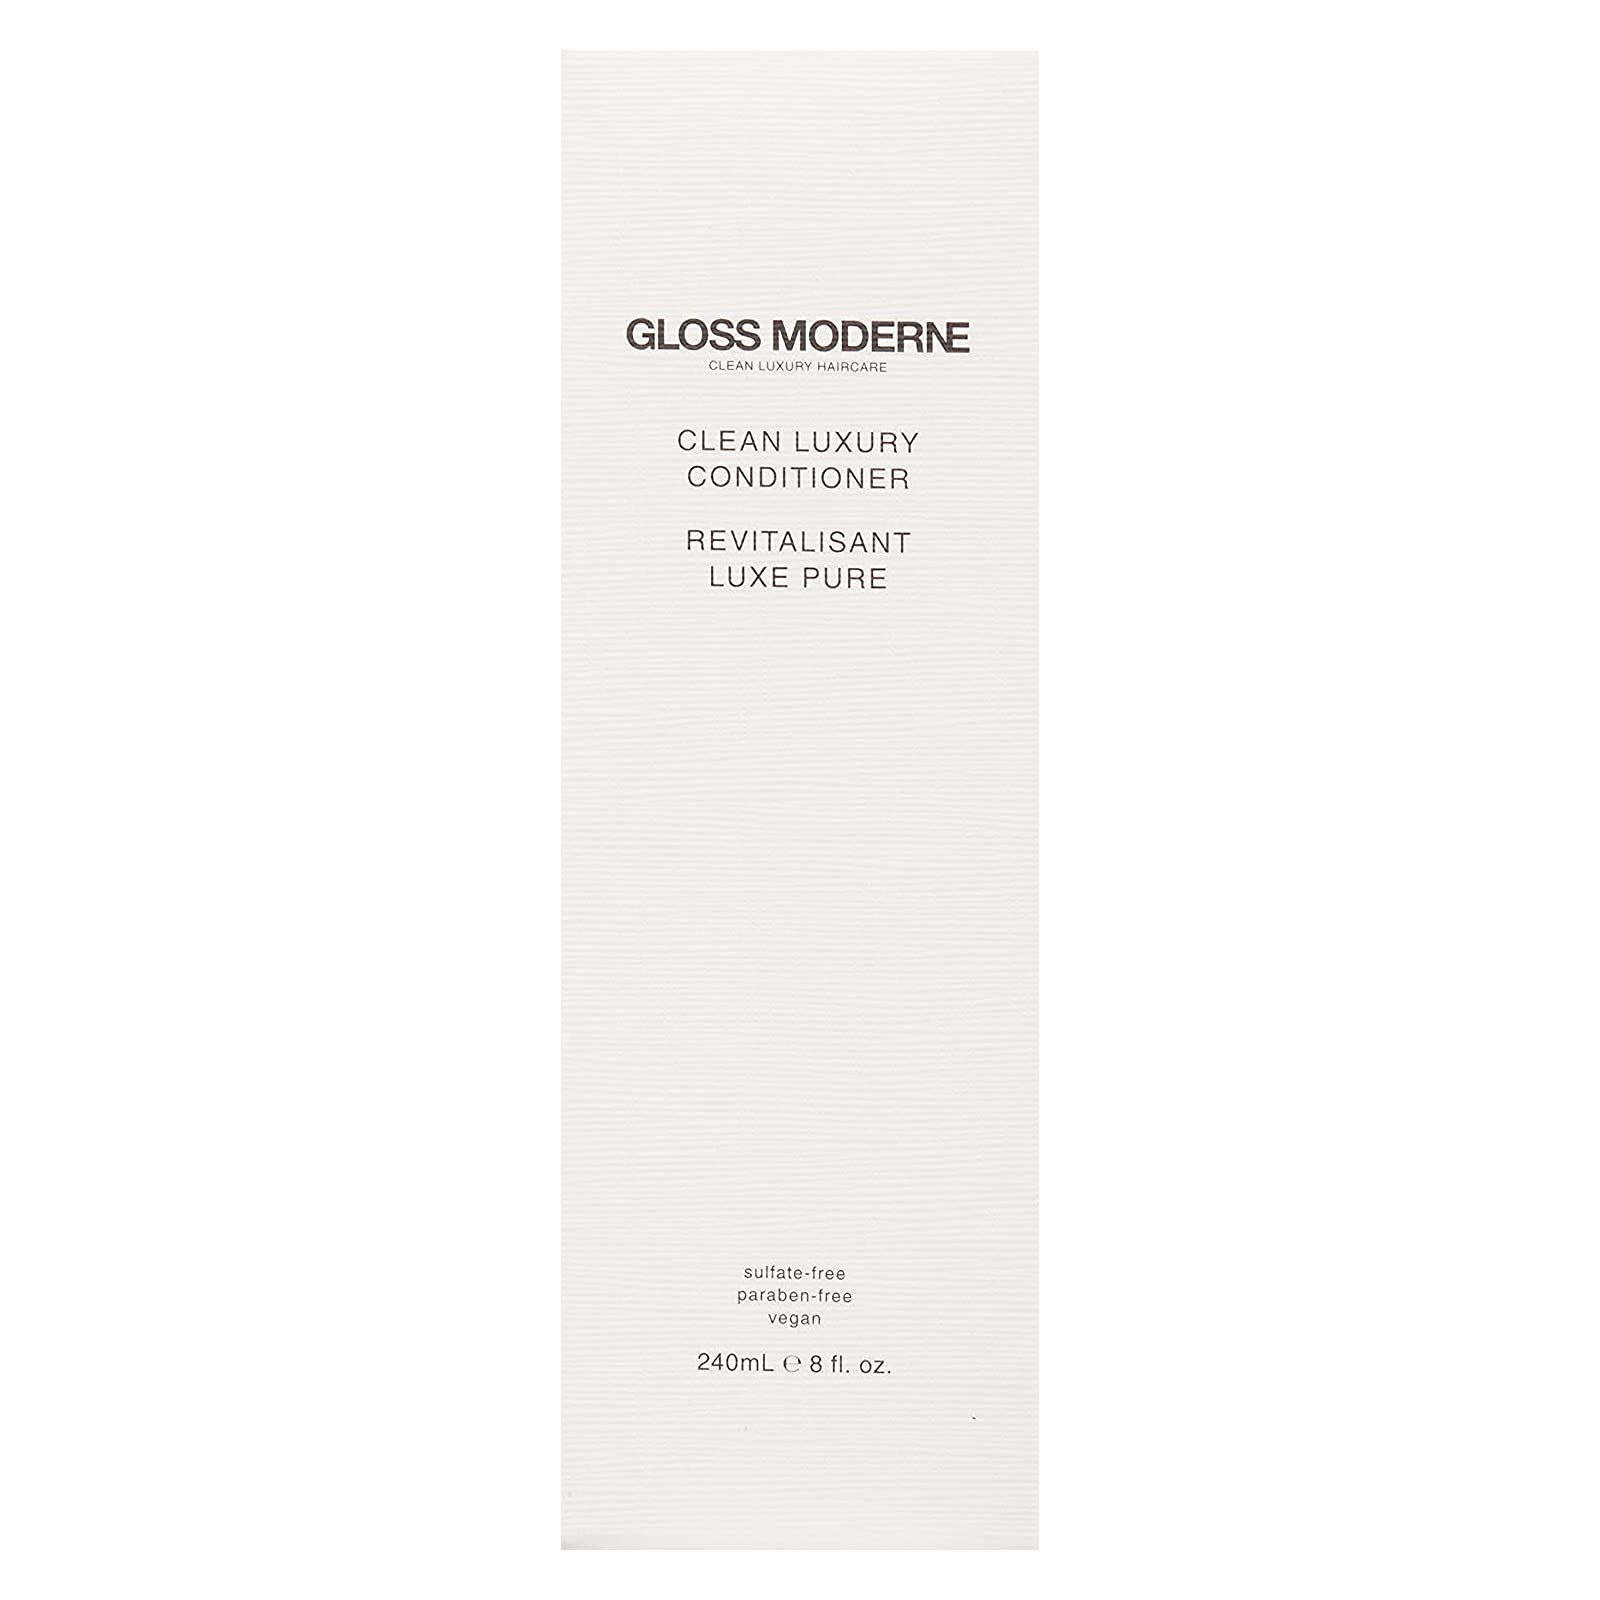 Clean Luxury Hair Conditioner by GLOSS MODERNE - 8 Fl Oz - Treatment for Damaged and Dry Hair with Notes of Mediterranean Almond and Coconut Accented with Cognac - For Soft and Shiny Hair